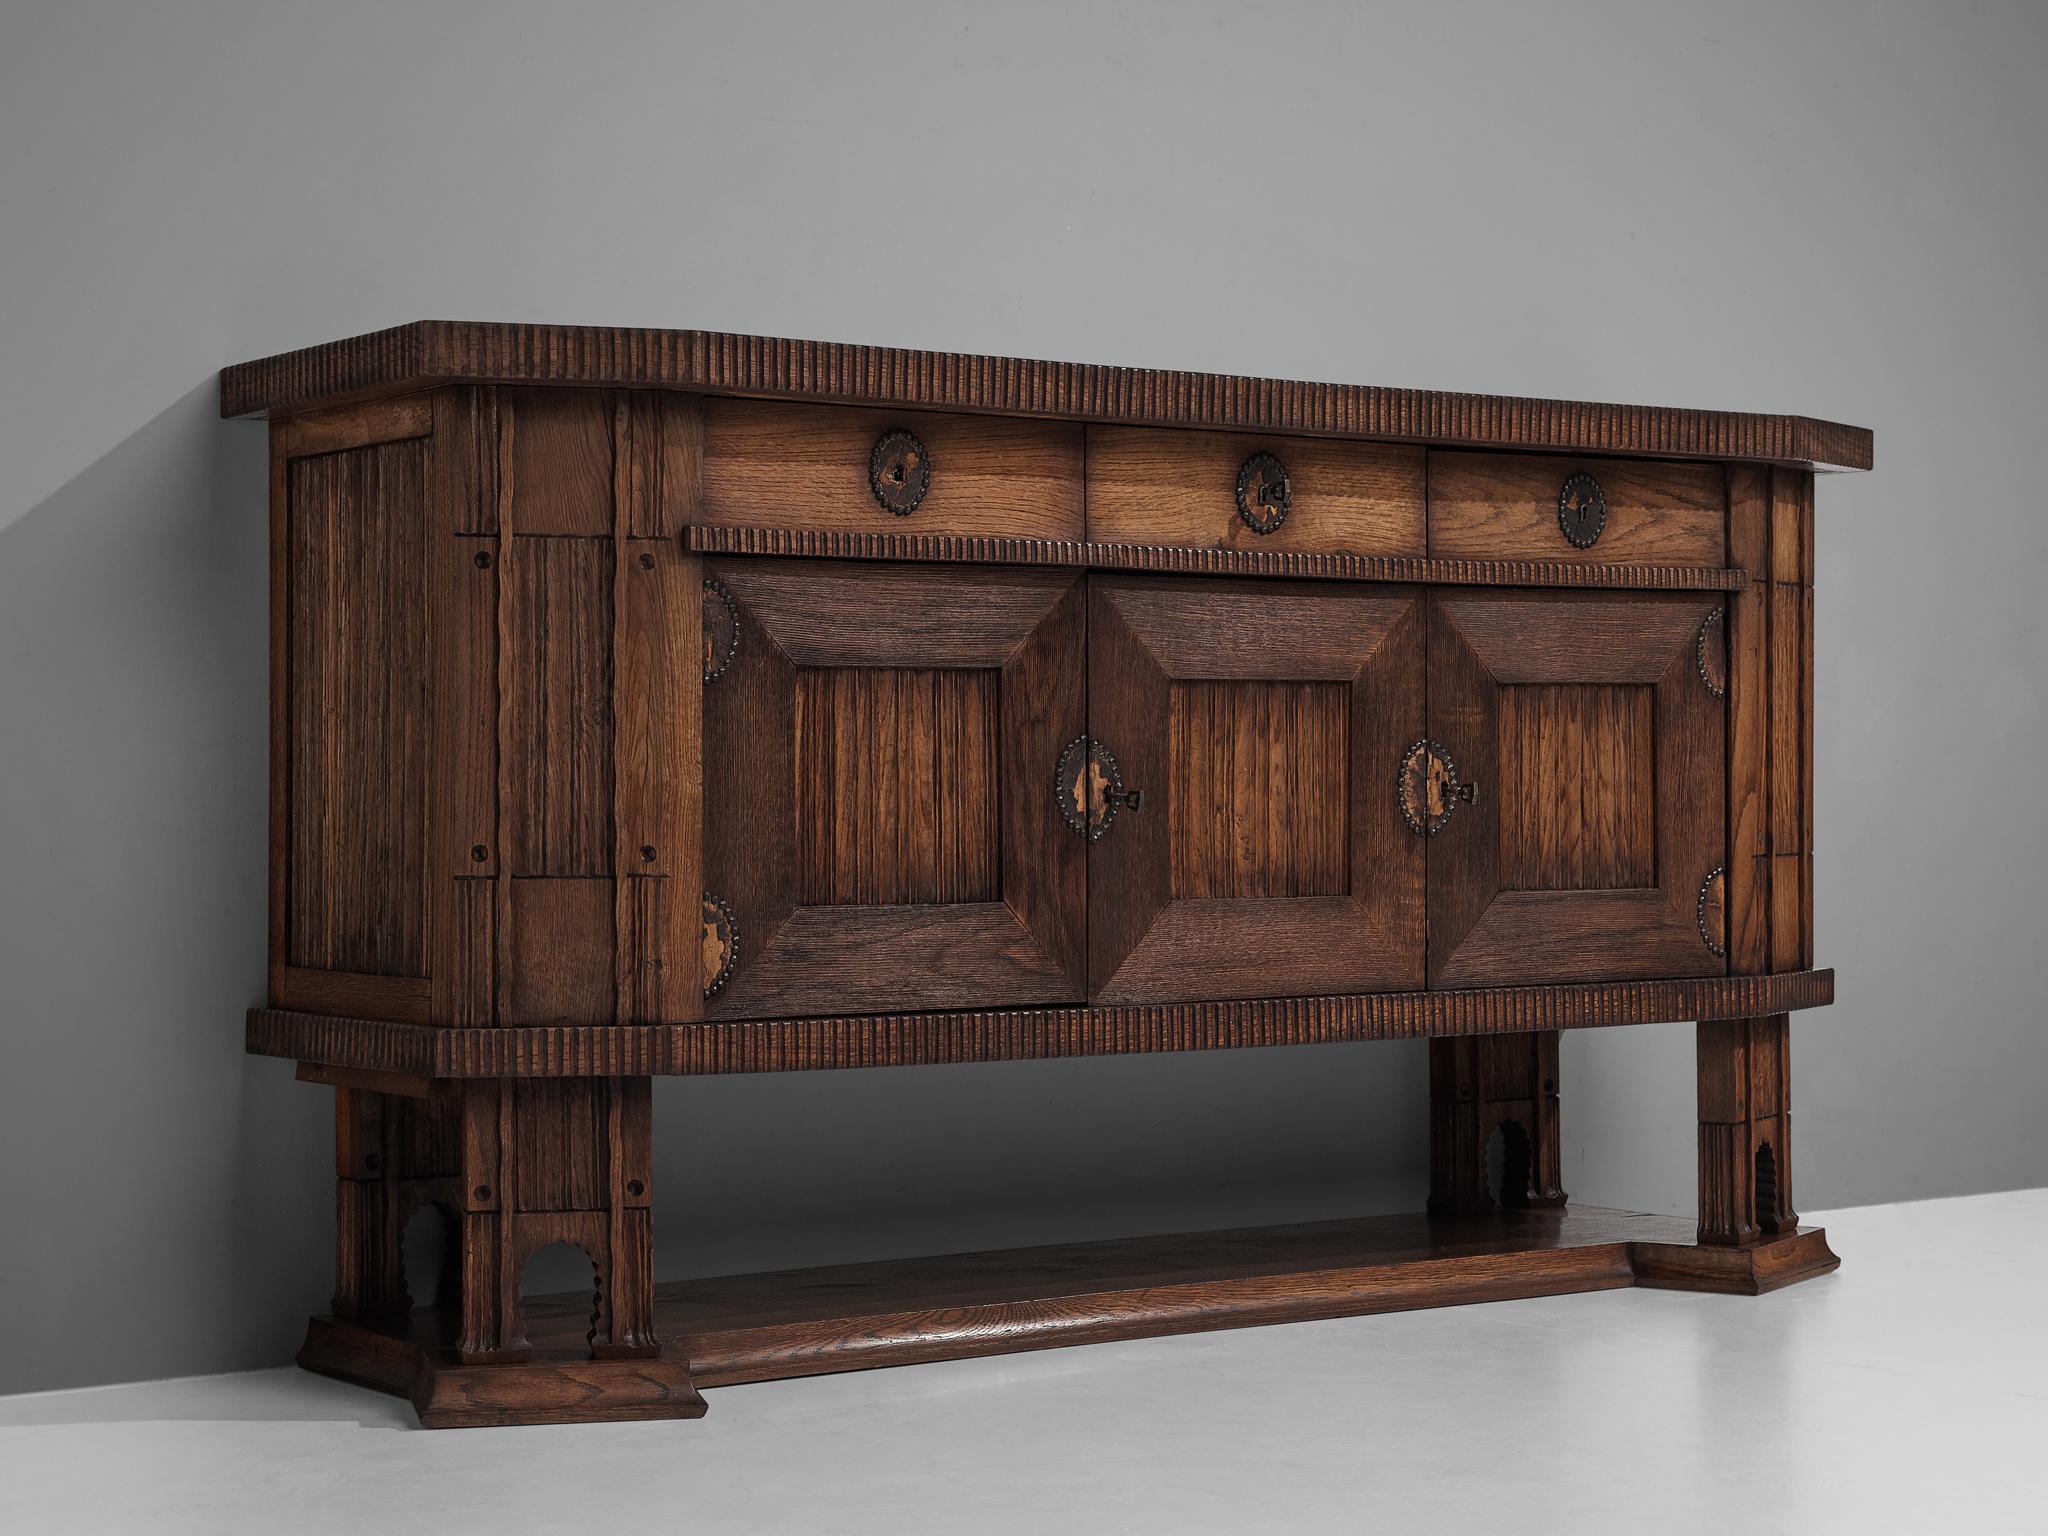 Ernesto Valabrega, sideboard, oak, Italy, 1930s

This large sideboard in oak by Ernesto Valabrega features not only visual qualities but also great storage space. Three drawers and three doors are structuring the outside and are furnished with